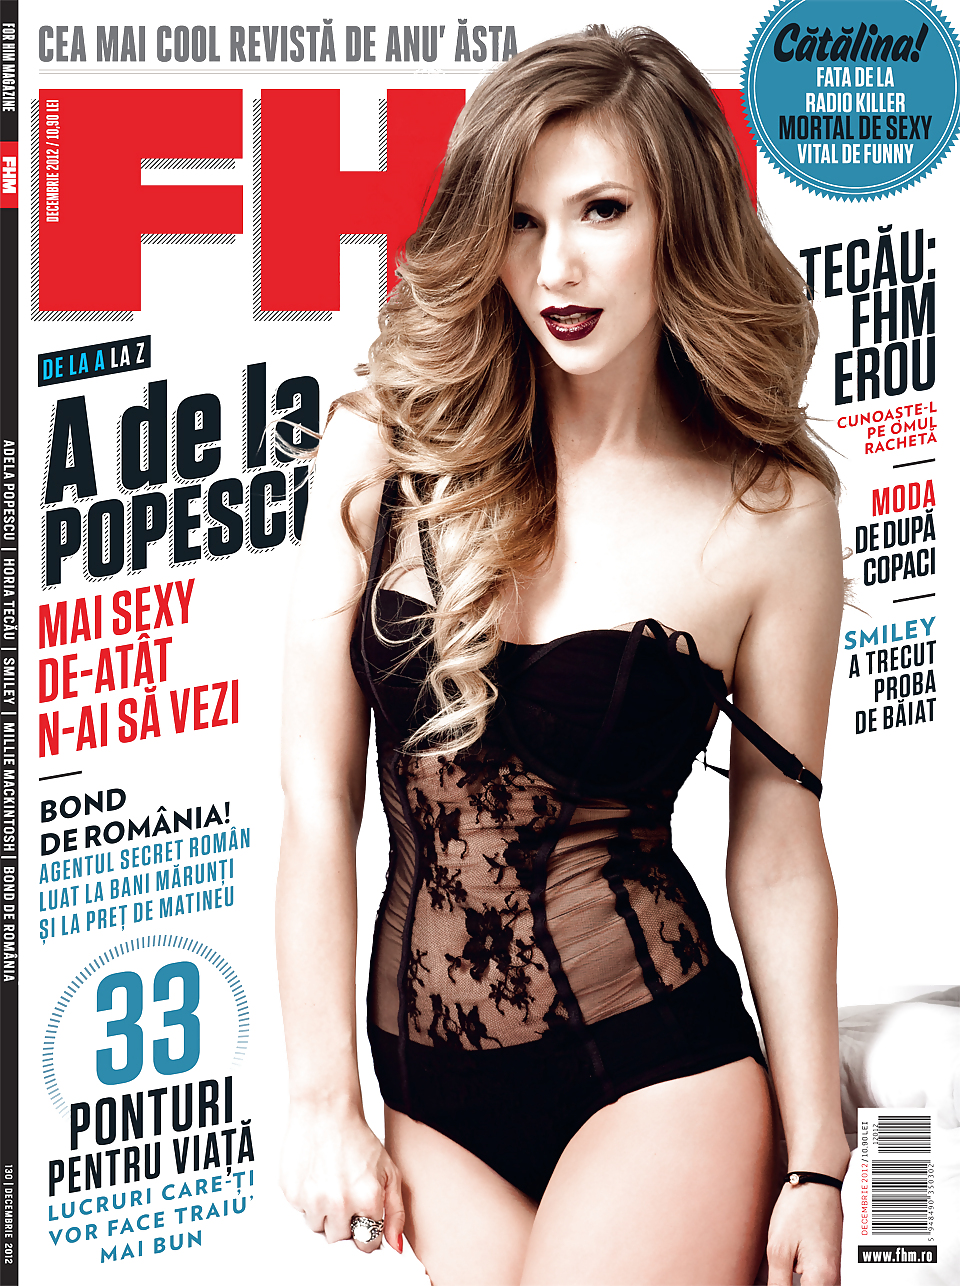 Adela popescu (Romanian actress, singer) for fhm 2012 
 #23542330